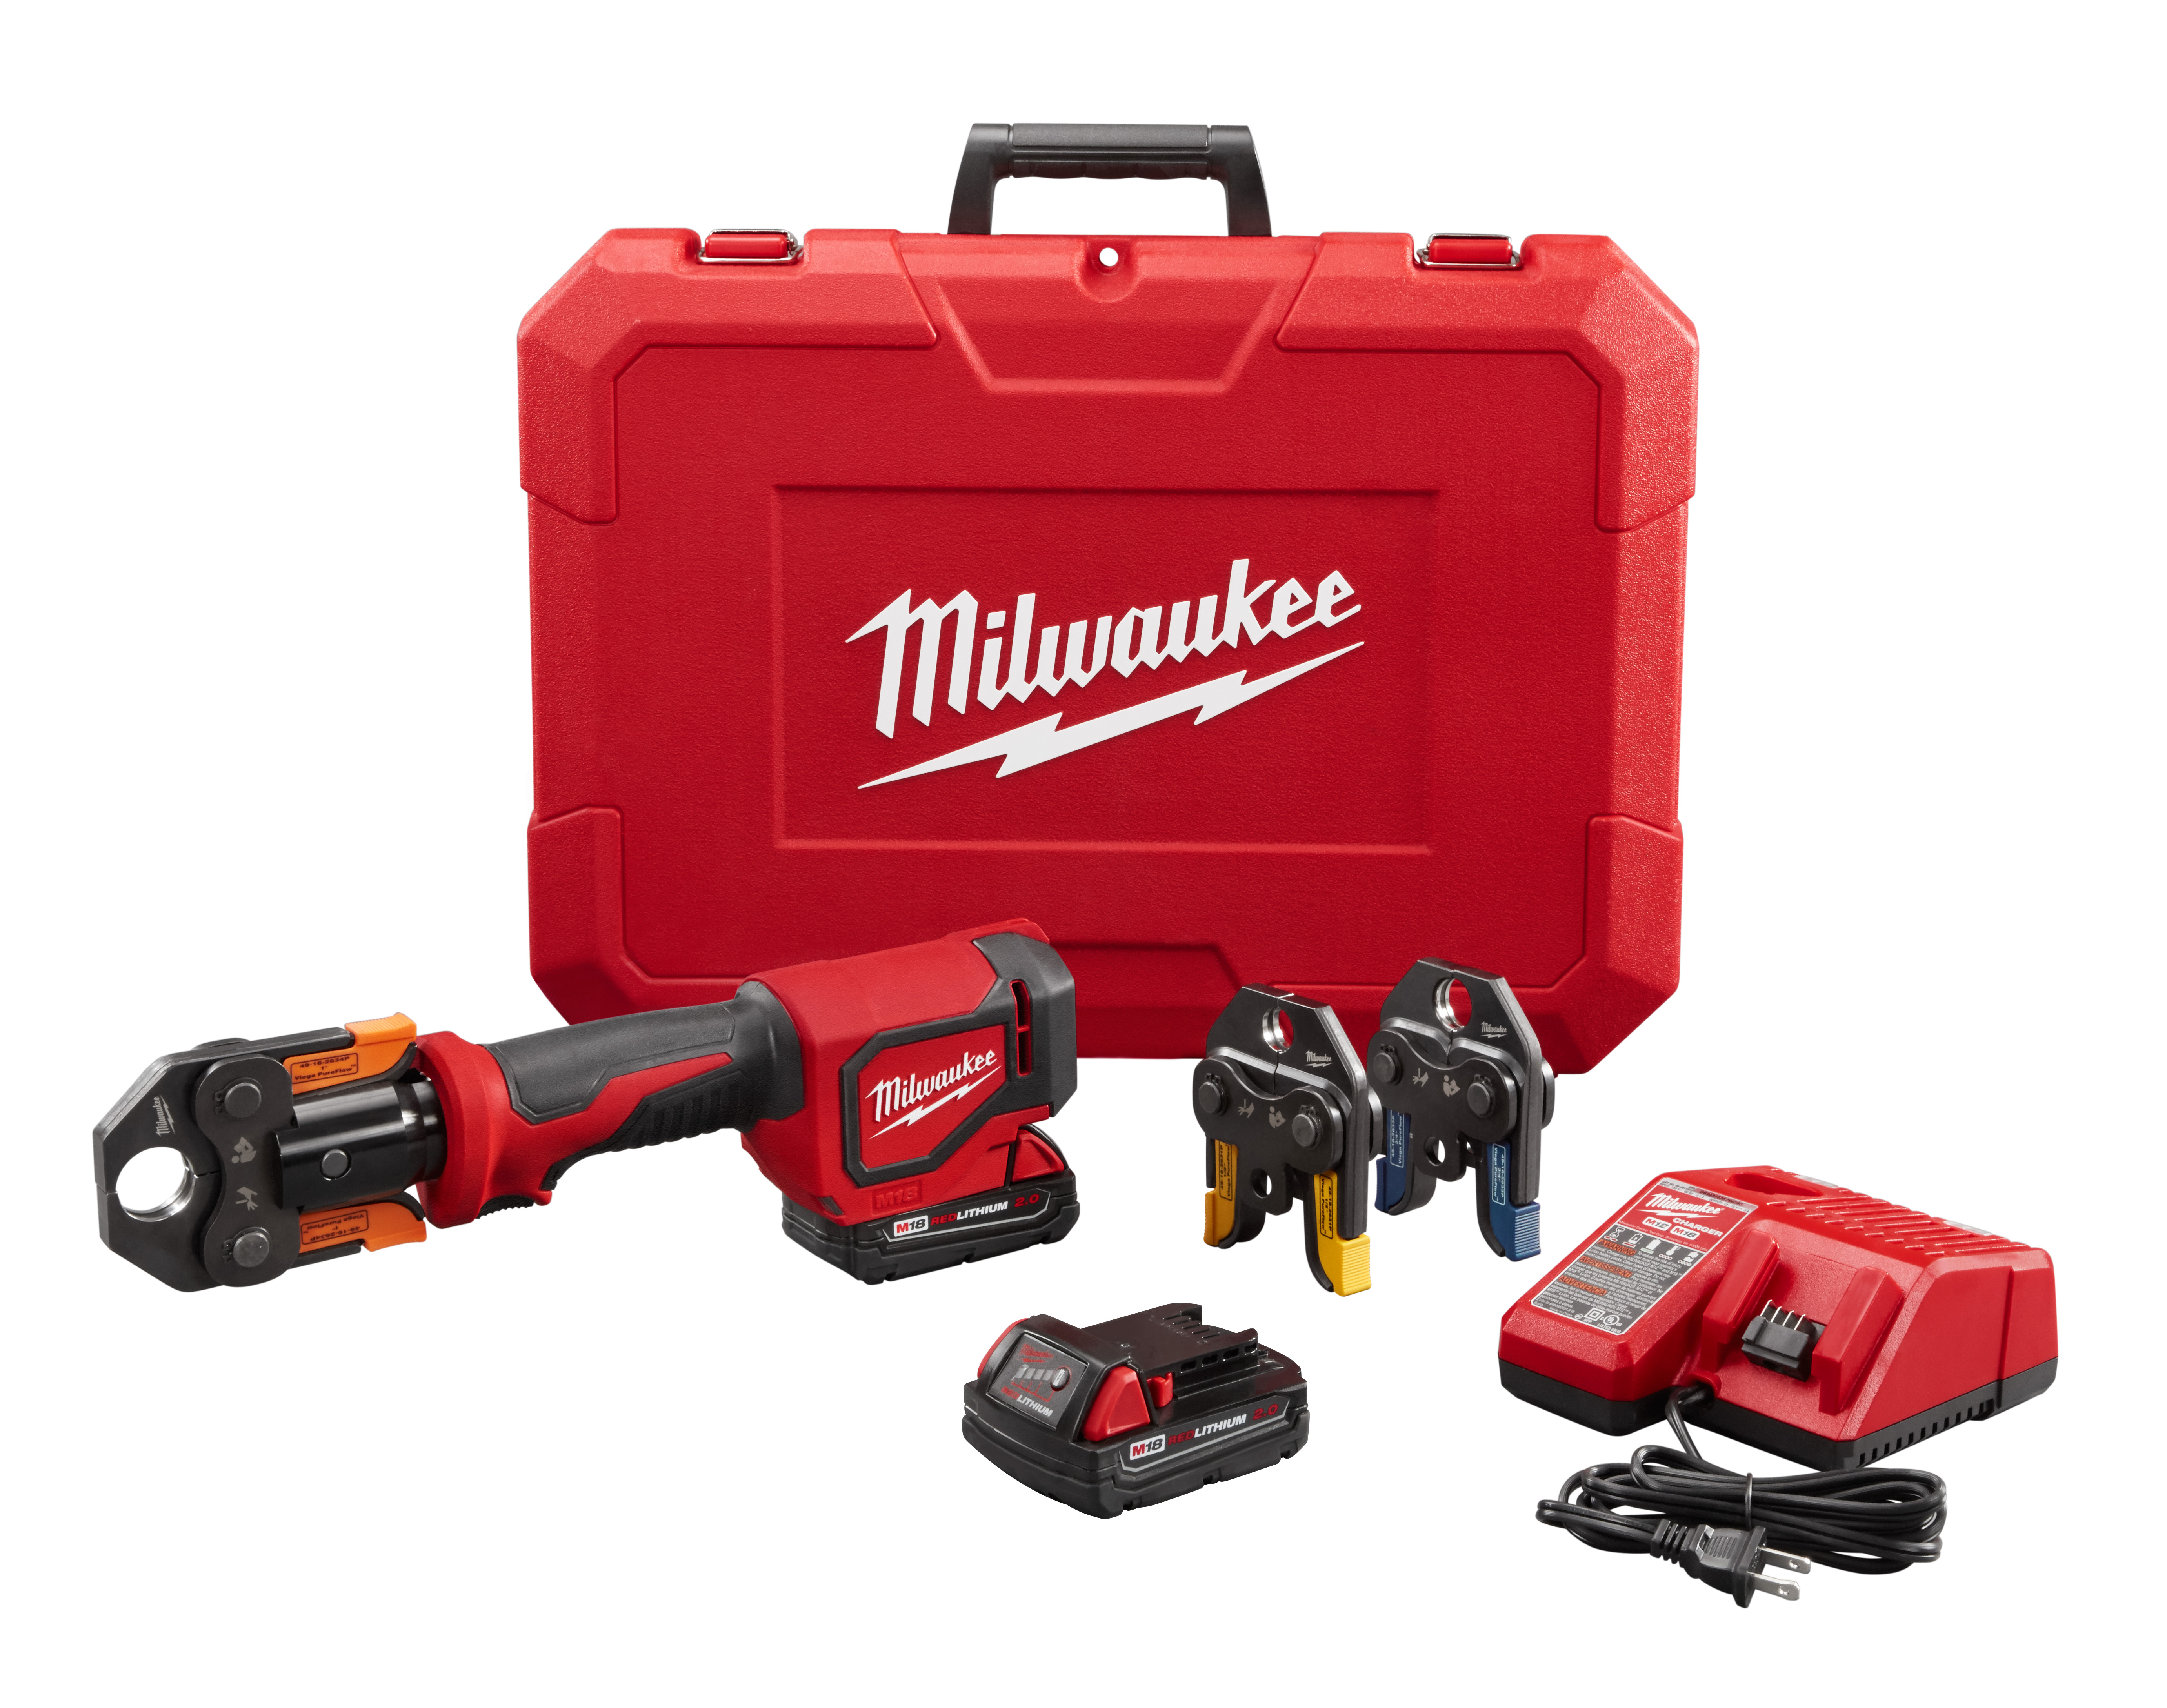 Milwaukee® 2674-22P Press Tool Kit, Up to 1 in Crimping, 18 VDC, M12™ REDLITHIUM™ Lithium‑Ion Battery, 13-1/2 in OAL